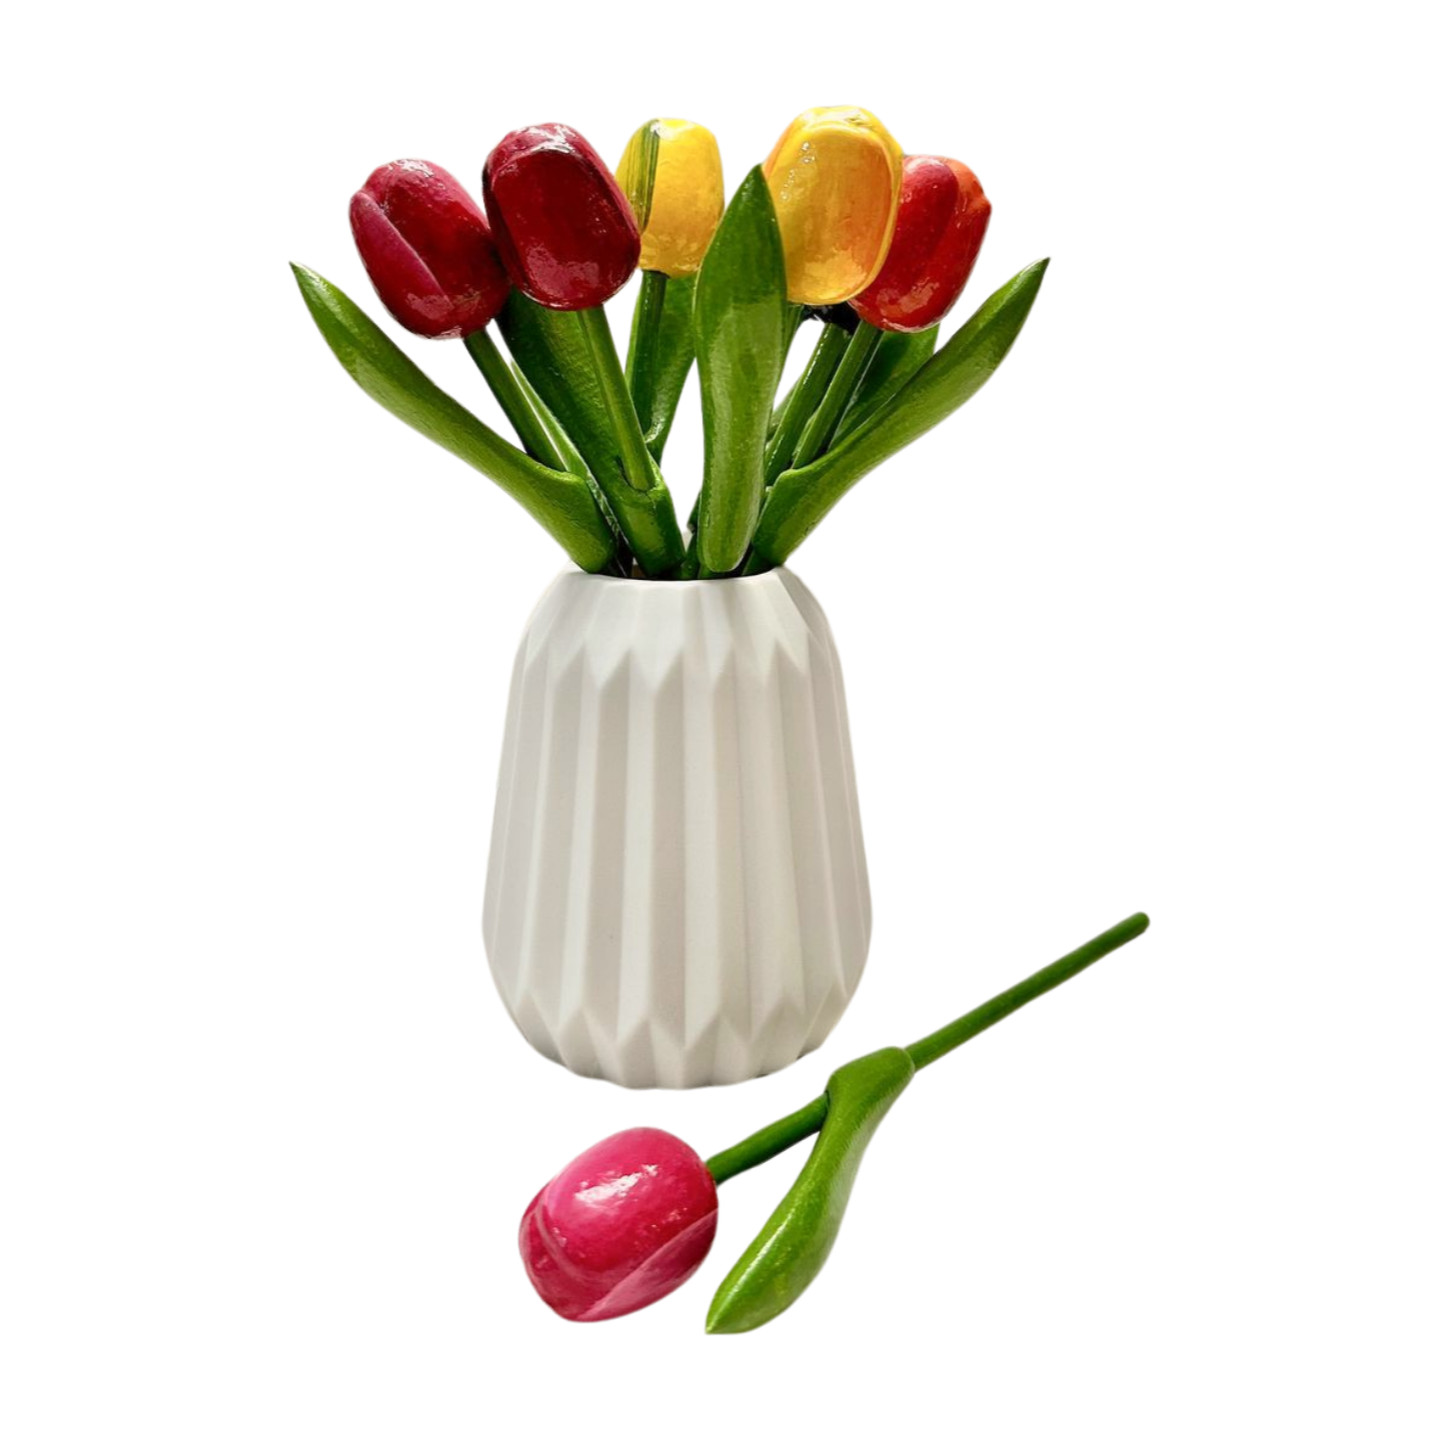 Mini wooden tulip bouquet shown in a white vase and a pink tulip laying in front of the vase for size reference.